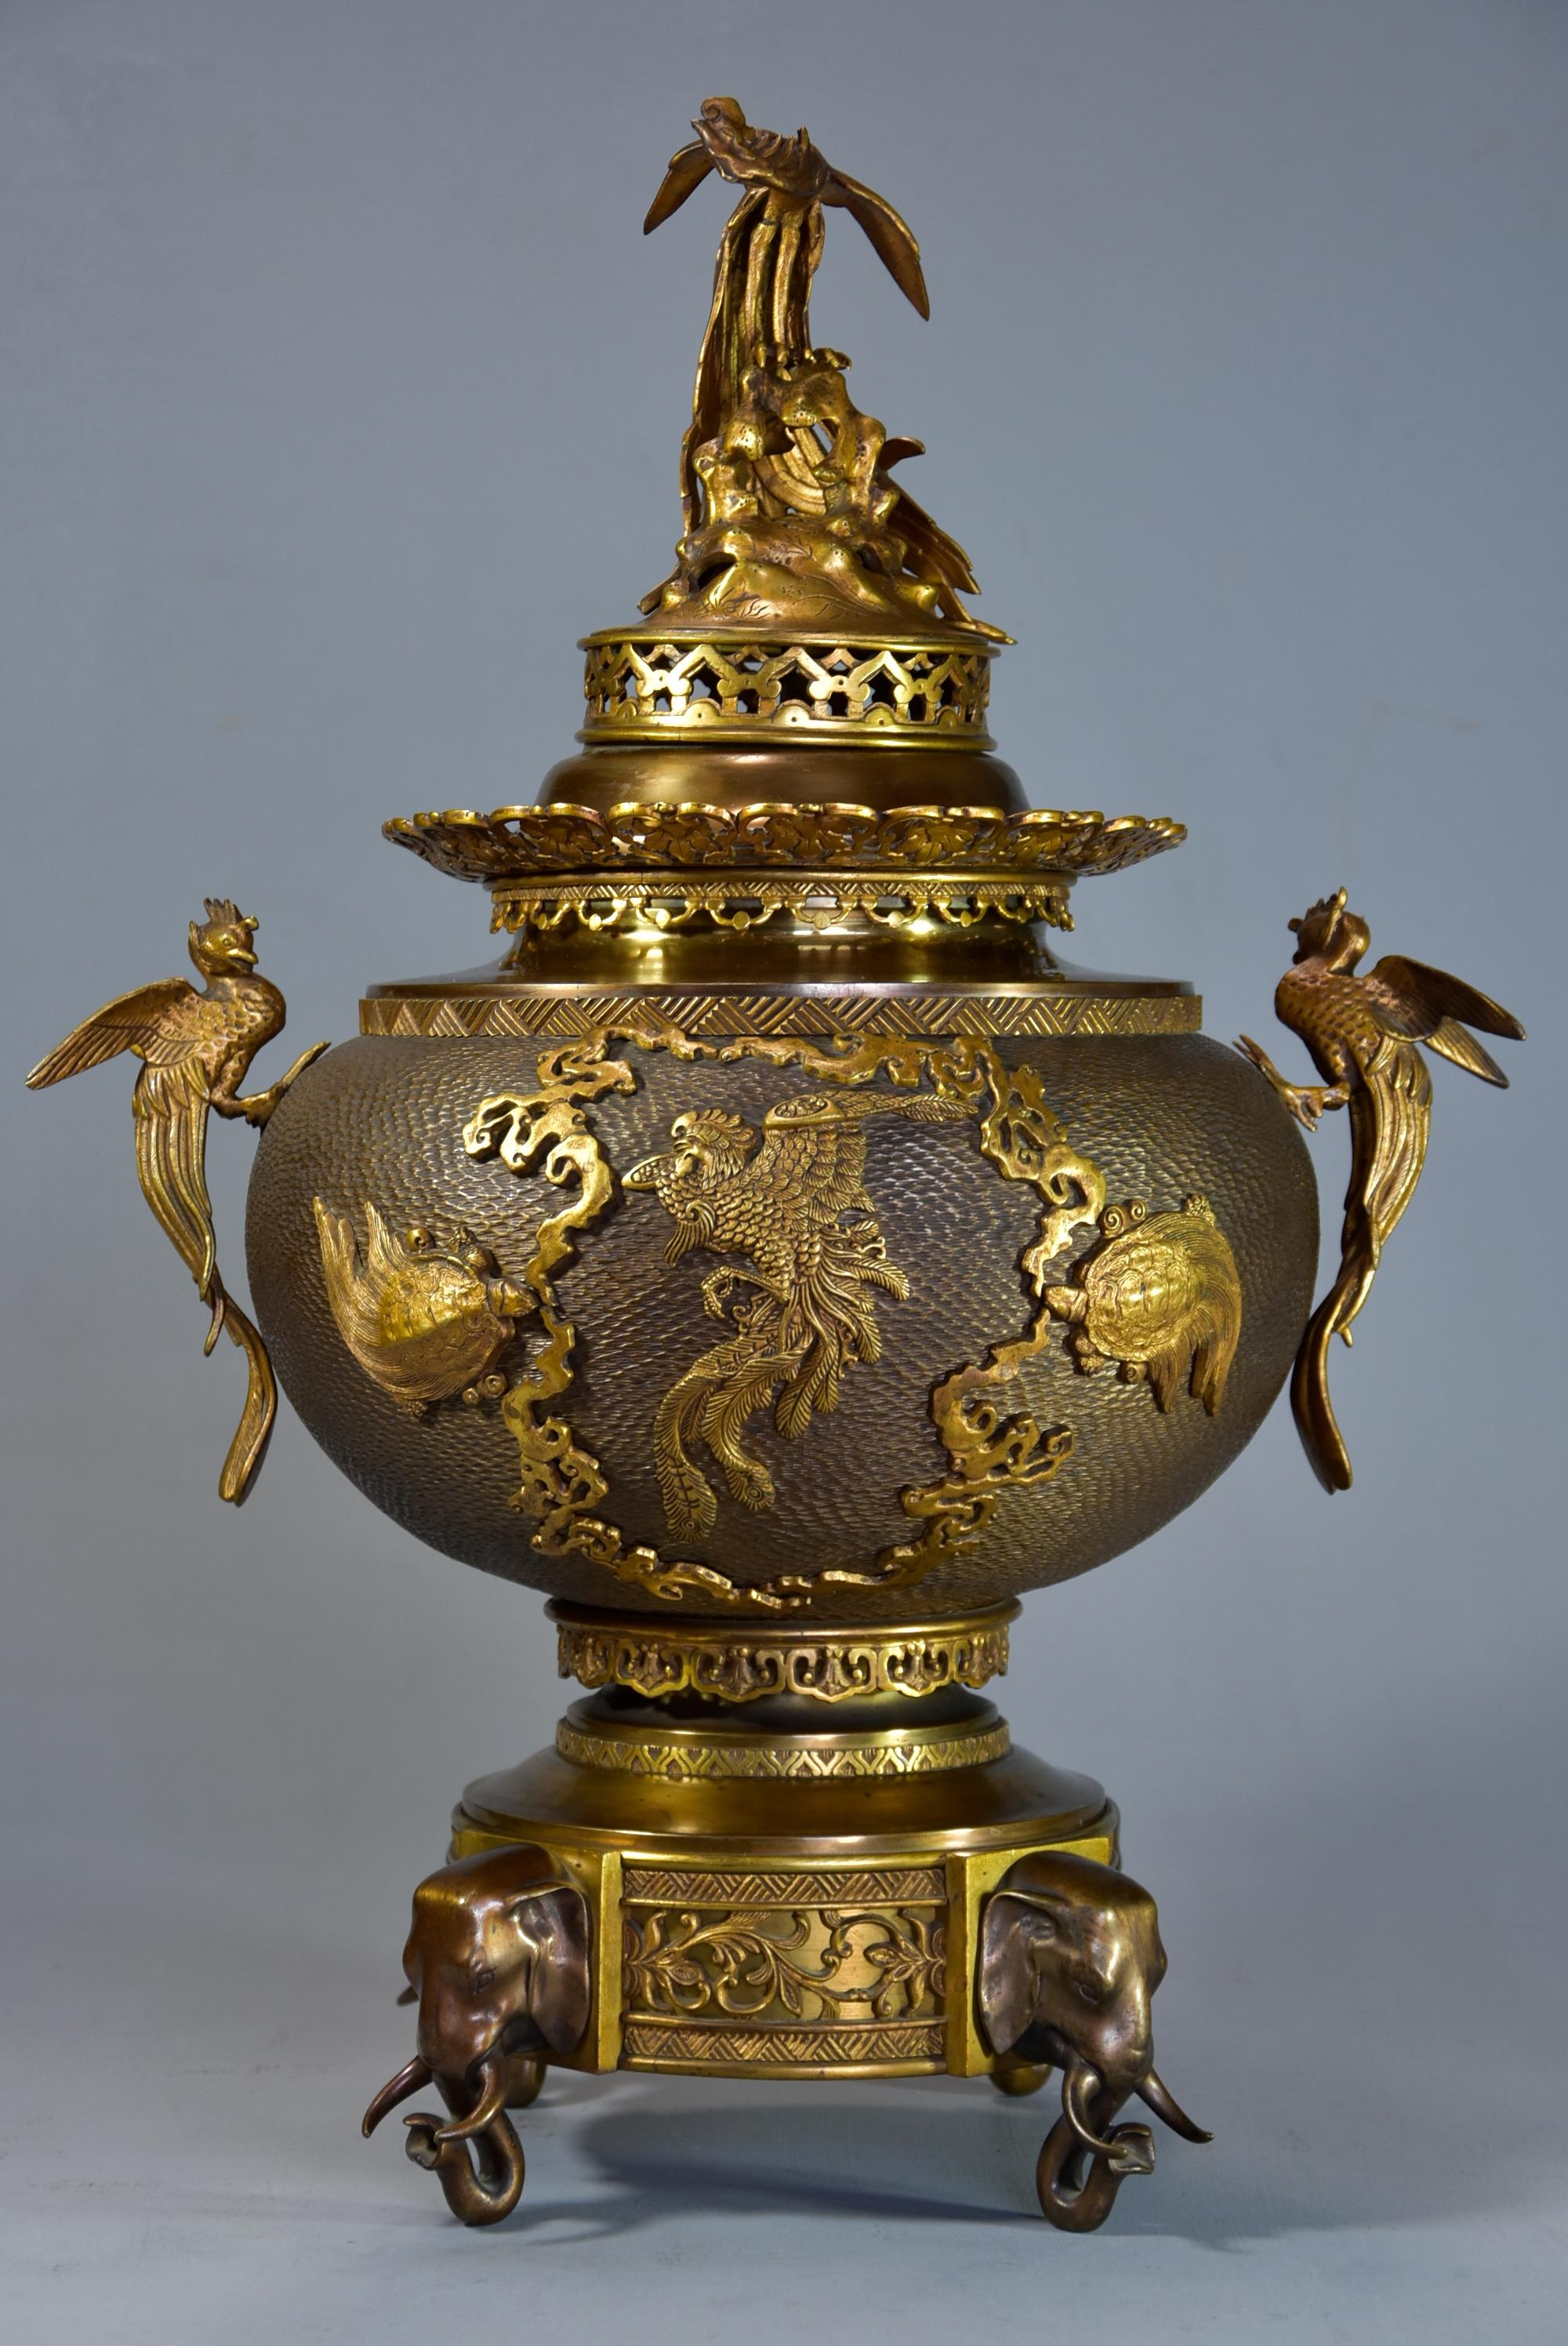 A fine quality late 19th century French Japonism style gilt and patinated bronze incense burner three piece set.

This superb set consists of an incense burner (or koro) with gilt bronze pierced lid with bird decoration and pieced rim